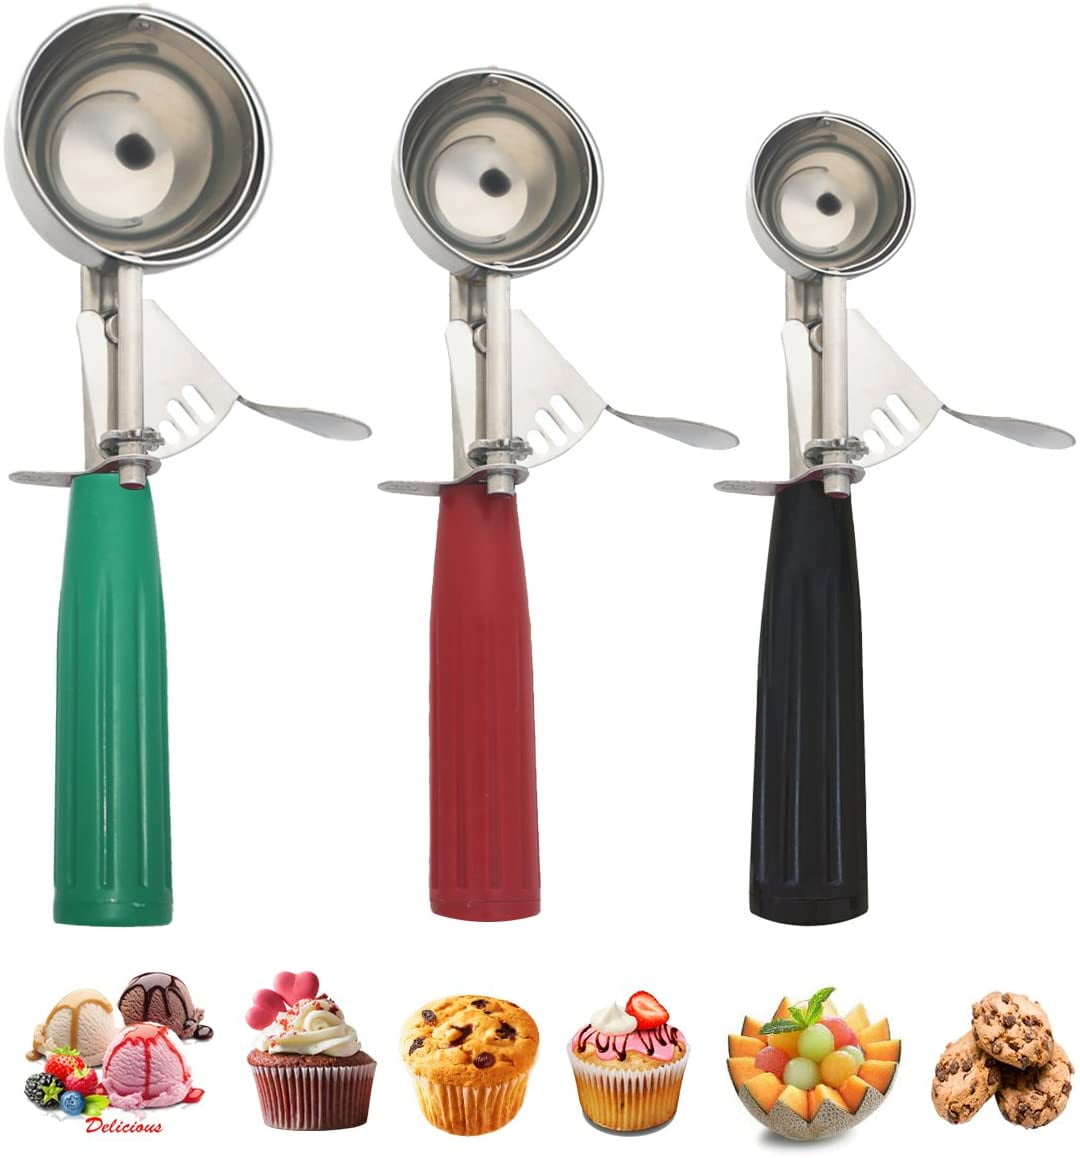 Cupcake Scoop,Scoop with Silicone Plunger Measures Equal Cupcakes or Muffins One-Touch Sliding Button Dispenses Batter。 1PC